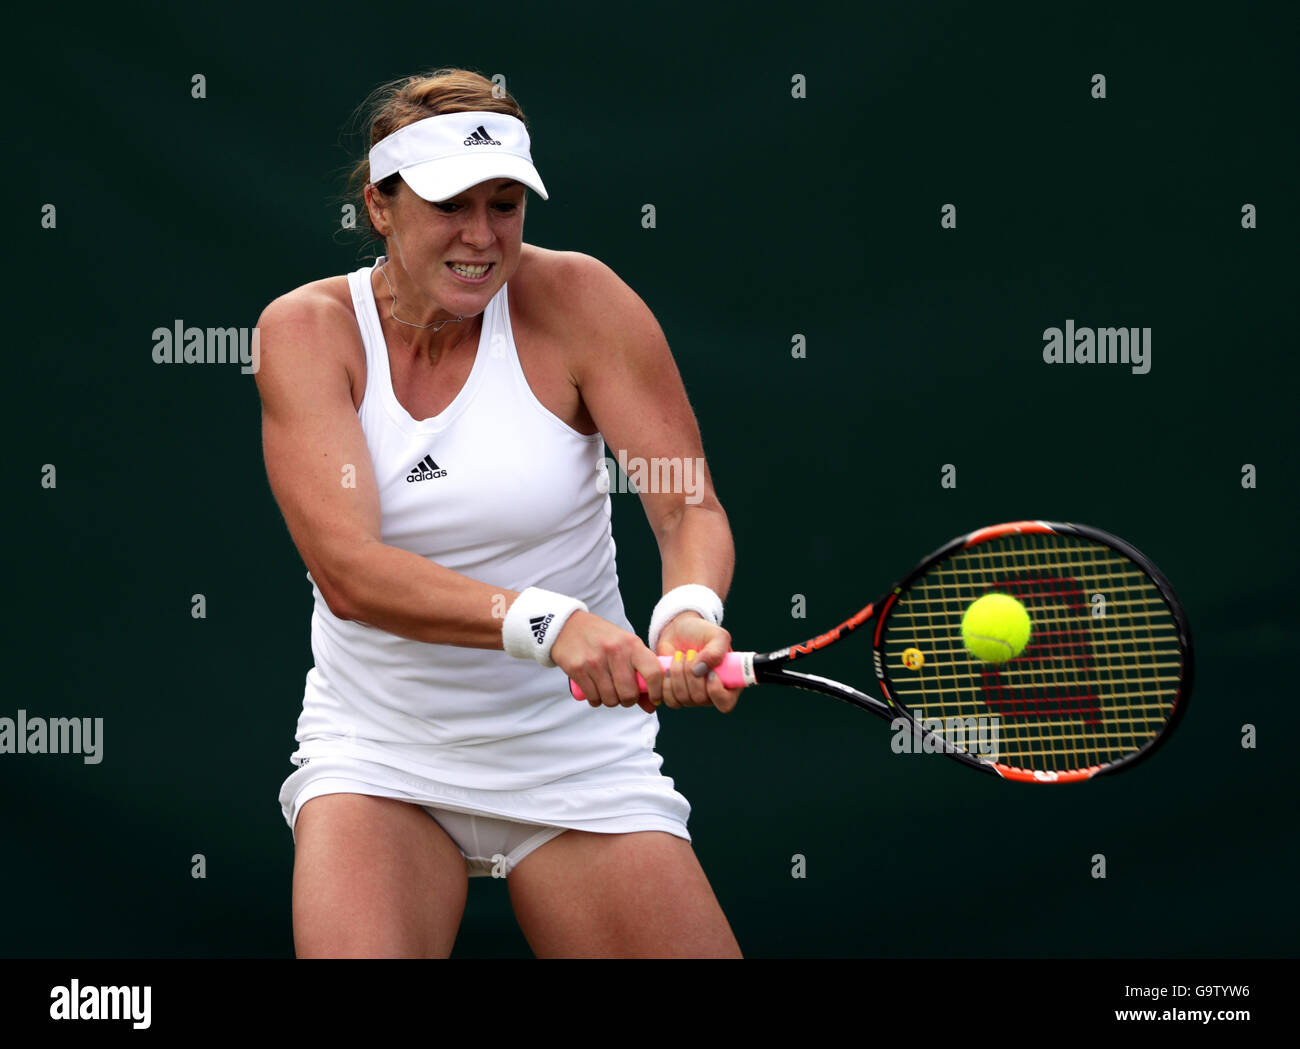 Anastasia Pavlyuchenkova in action against Yulia Putintseva on day Five of the Wimbledon Championships at the All England Lawn Tennis and Croquet Club, Wimbledon. Stock Photo